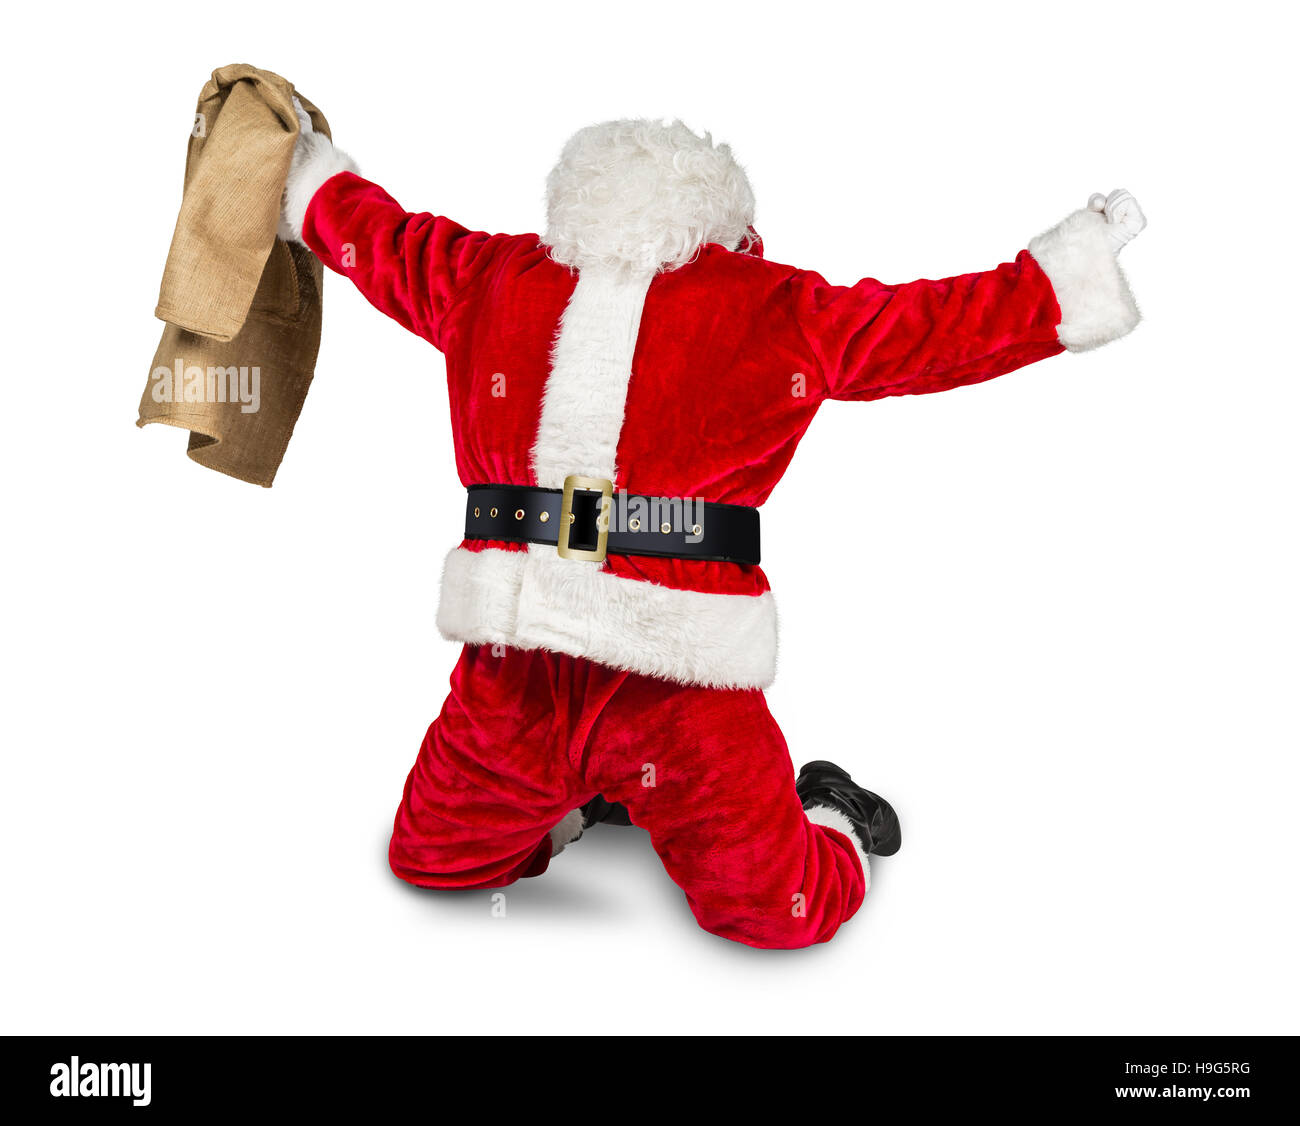 funny crazy hilarious red white santa claus celebration clench fist holding bag in the air job done isolated on white background Stock Photo